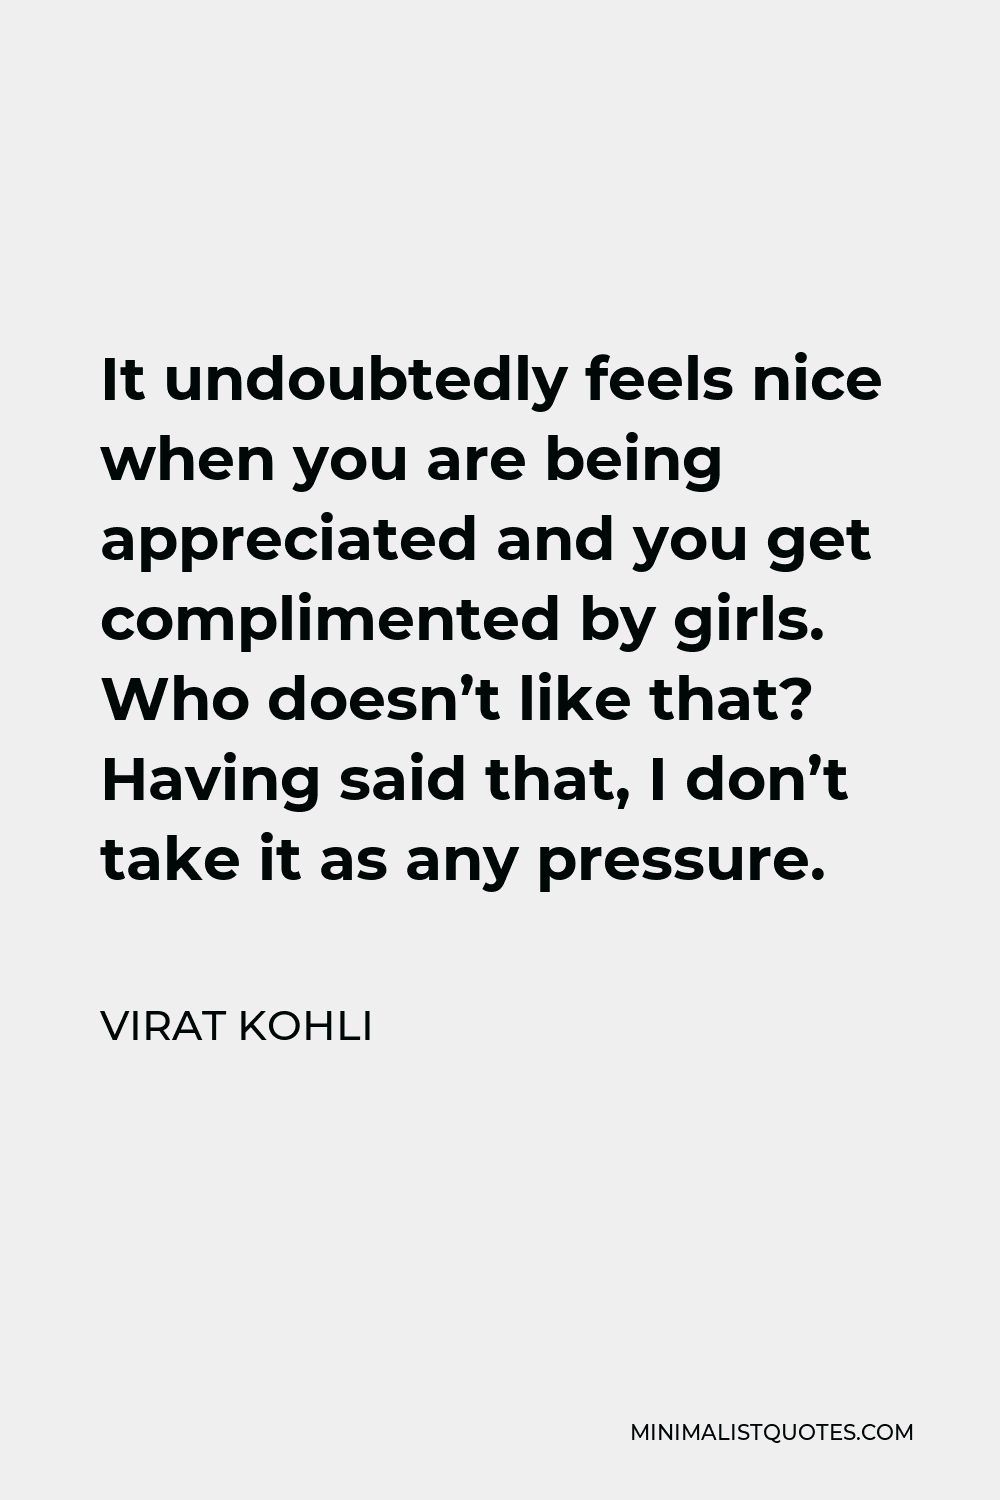 Virat Kohli Quote - It undoubtedly feels nice when you are being appreciated and you get complimented by girls. Who doesn’t like that? Having said that, I don’t take it as any pressure.